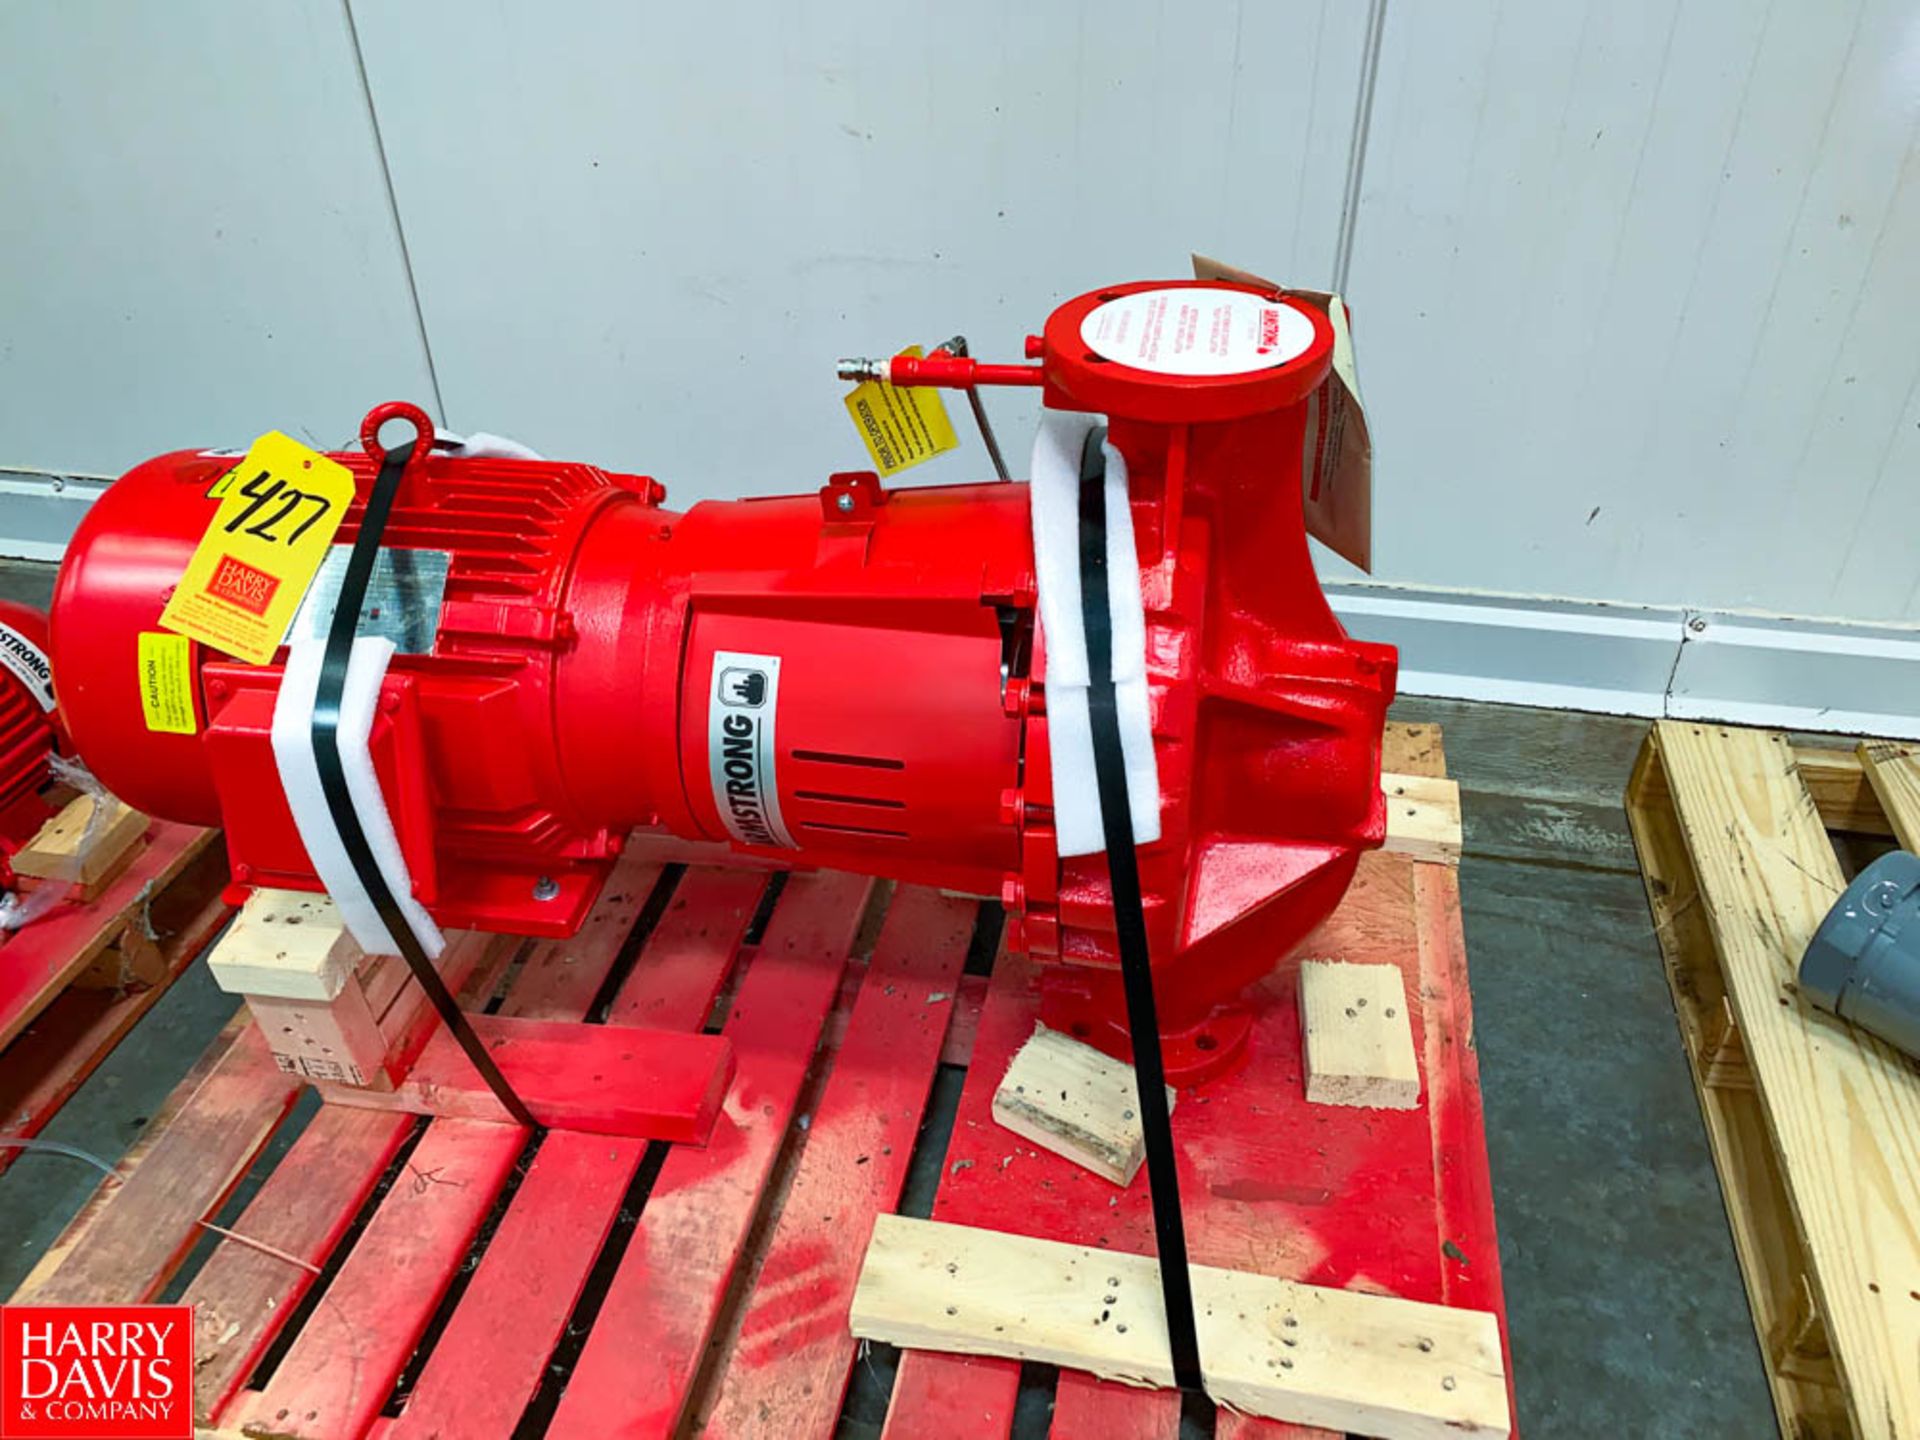 NEW Pump with 15 HP 1,450 RPM Motor Model: 3X3X13-4300, S/N: 1019114129 Rigging Fee: $ 75